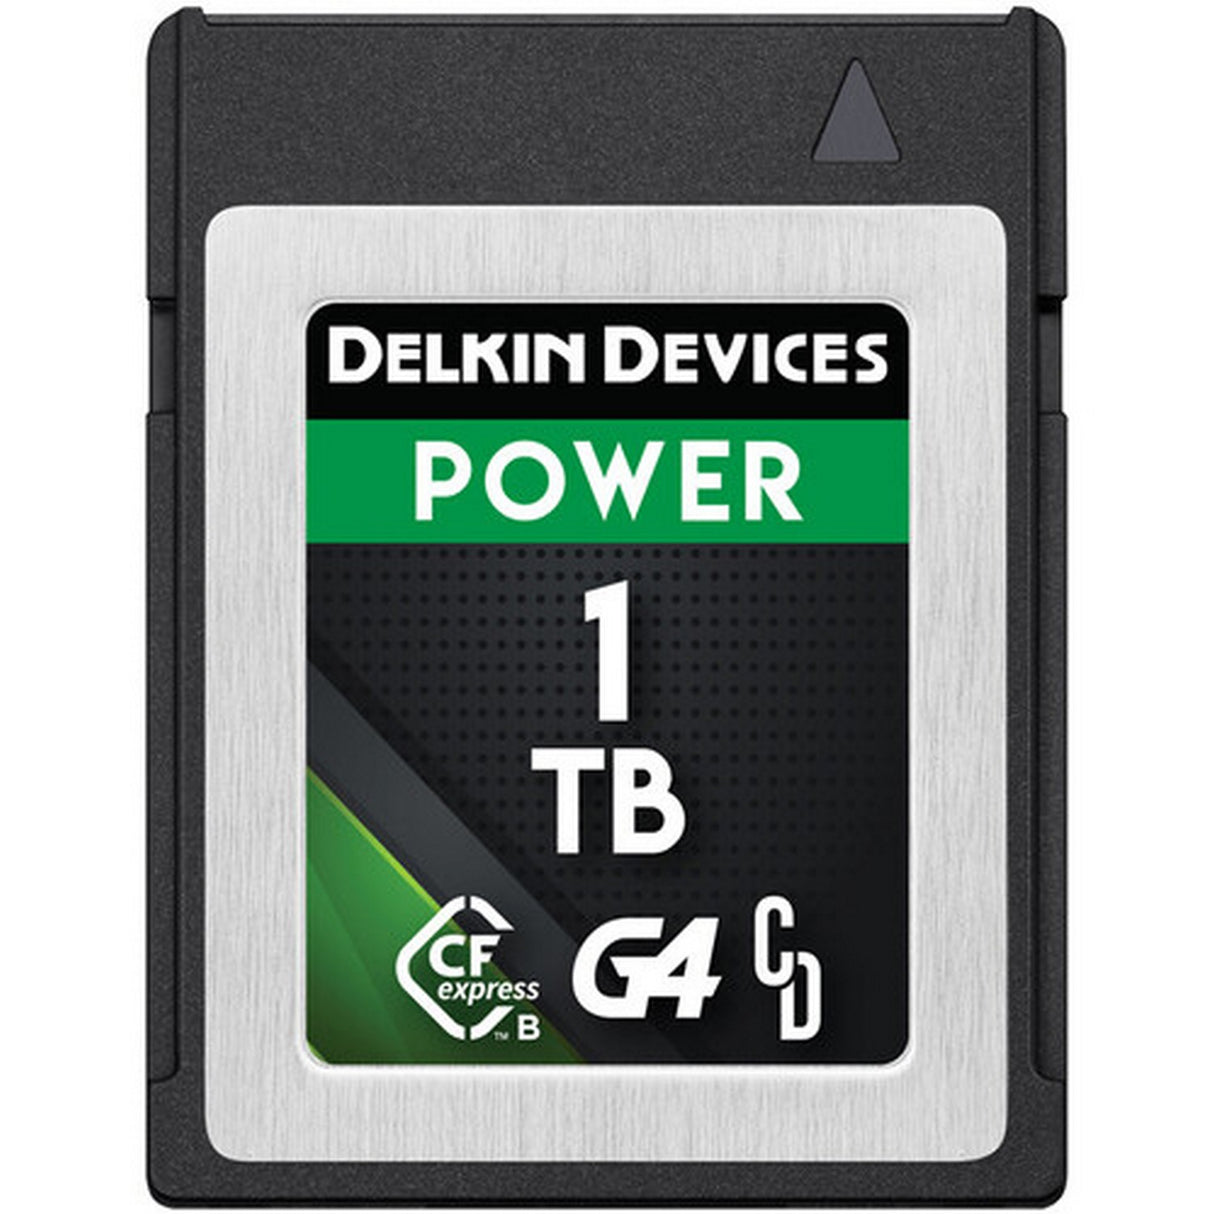 Delkin Devices CFexpresss Power Type B Memory Card, 1TB